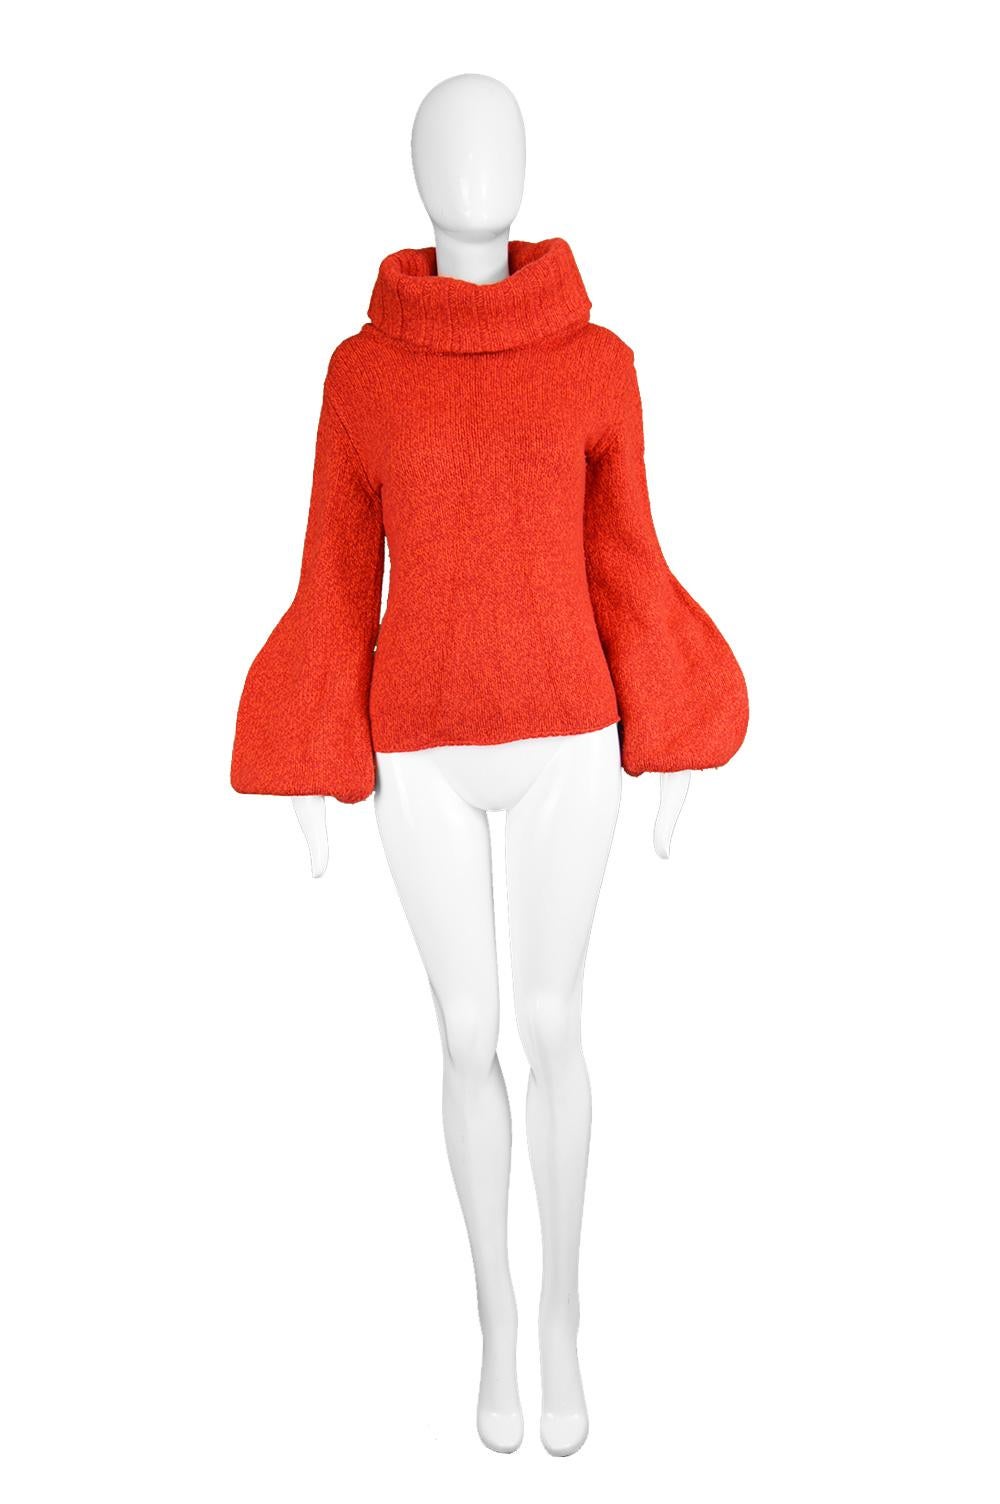 Mila Schon Vintage Pullover Red Wool & Cashmere Balloon Sleeve Roll Neck Jumper, 1980s

Size: Marked M. Please see measurements.
Bust - 36” / 91cm
Waist - 30” / 76cm
Length (Shoulder to Hem) - 21” / 53cm
Shoulder to Shoulder - 16” / 40cm
Sleeve Pit